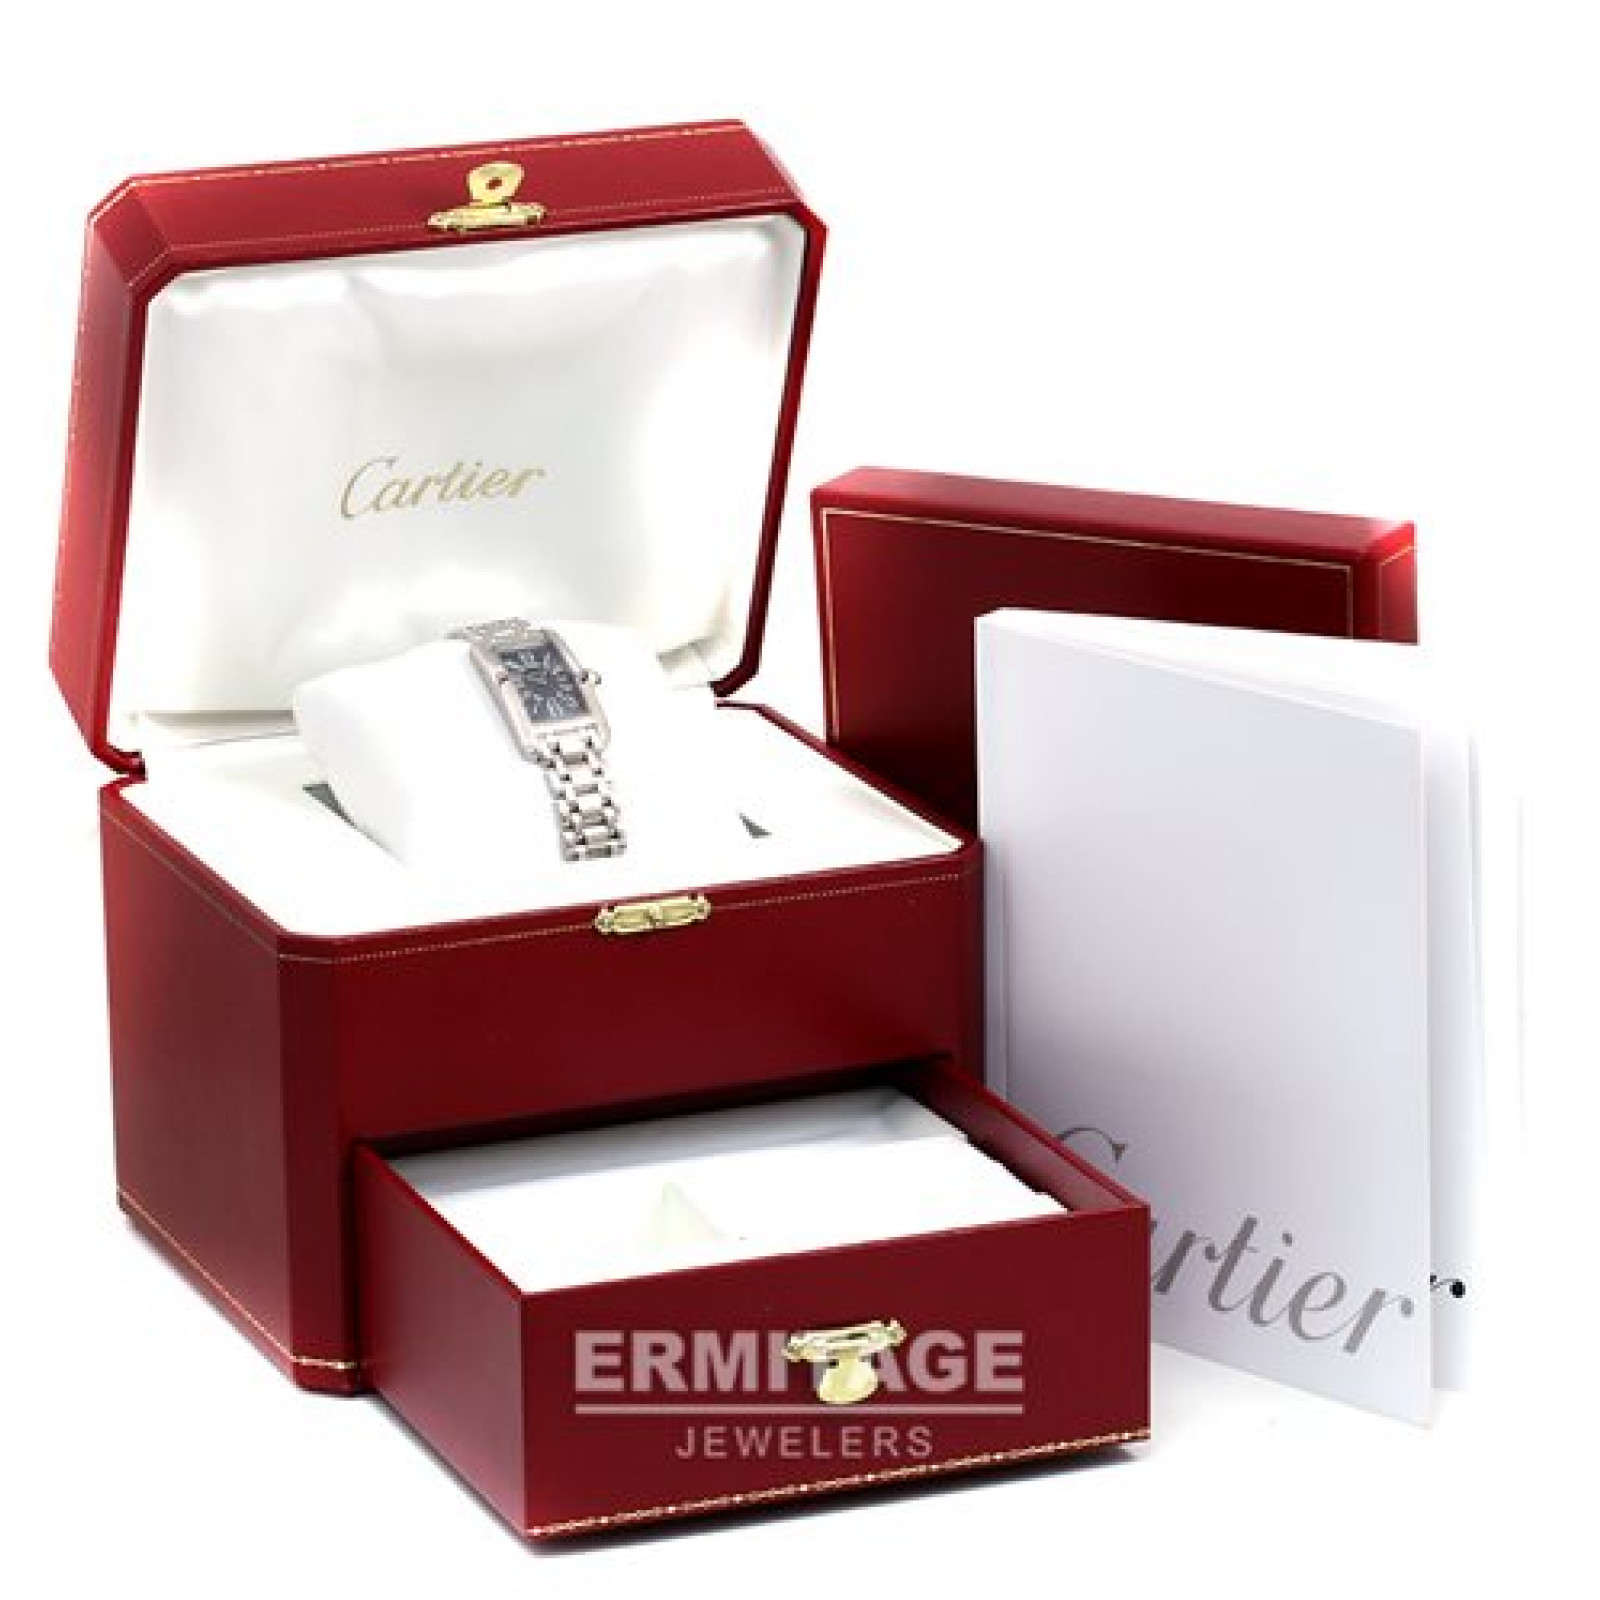 Cartier Tank Americaine WB701851 White Gold